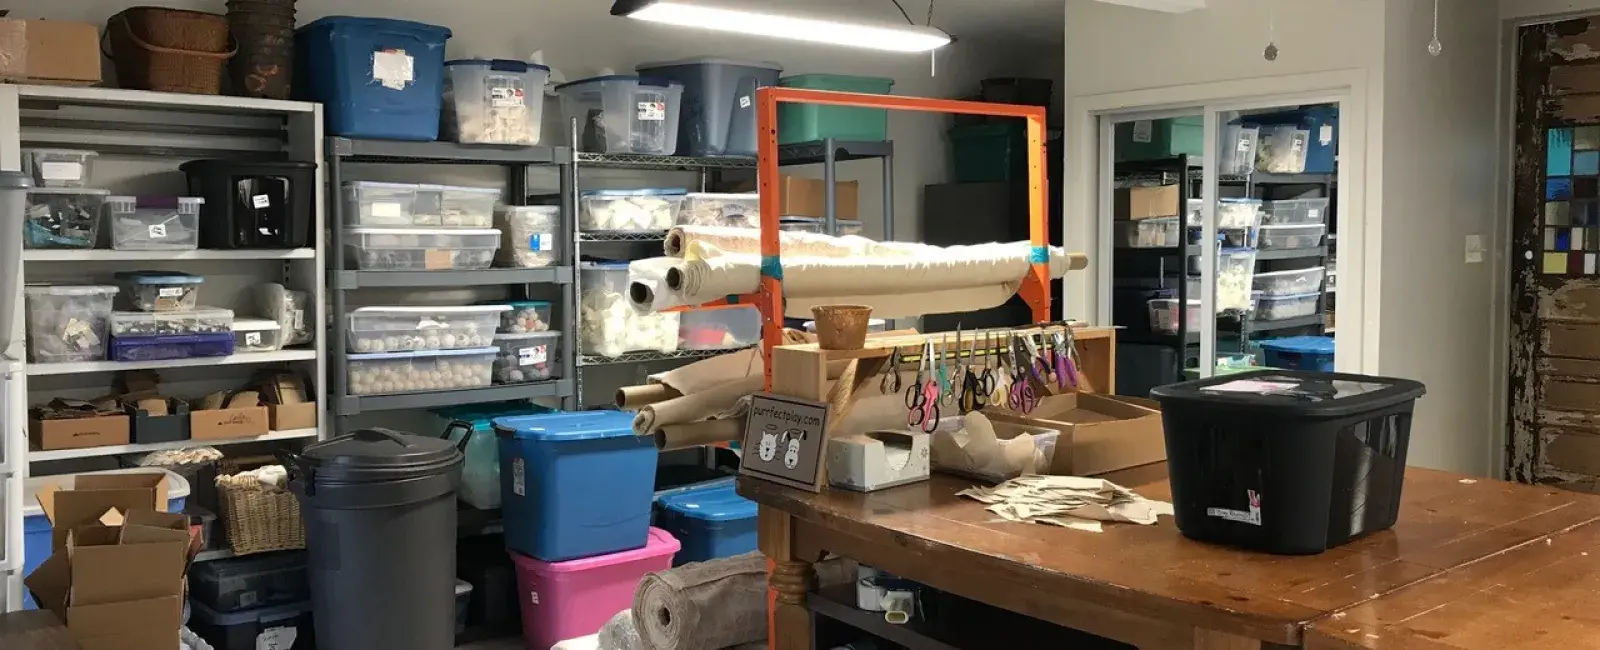 A craft studio, featuring a big wooden table in the middle with a black, plastic bin on top. Against the wall in the back are shelves with lots of bins and craft materials. Woman Business Owners.